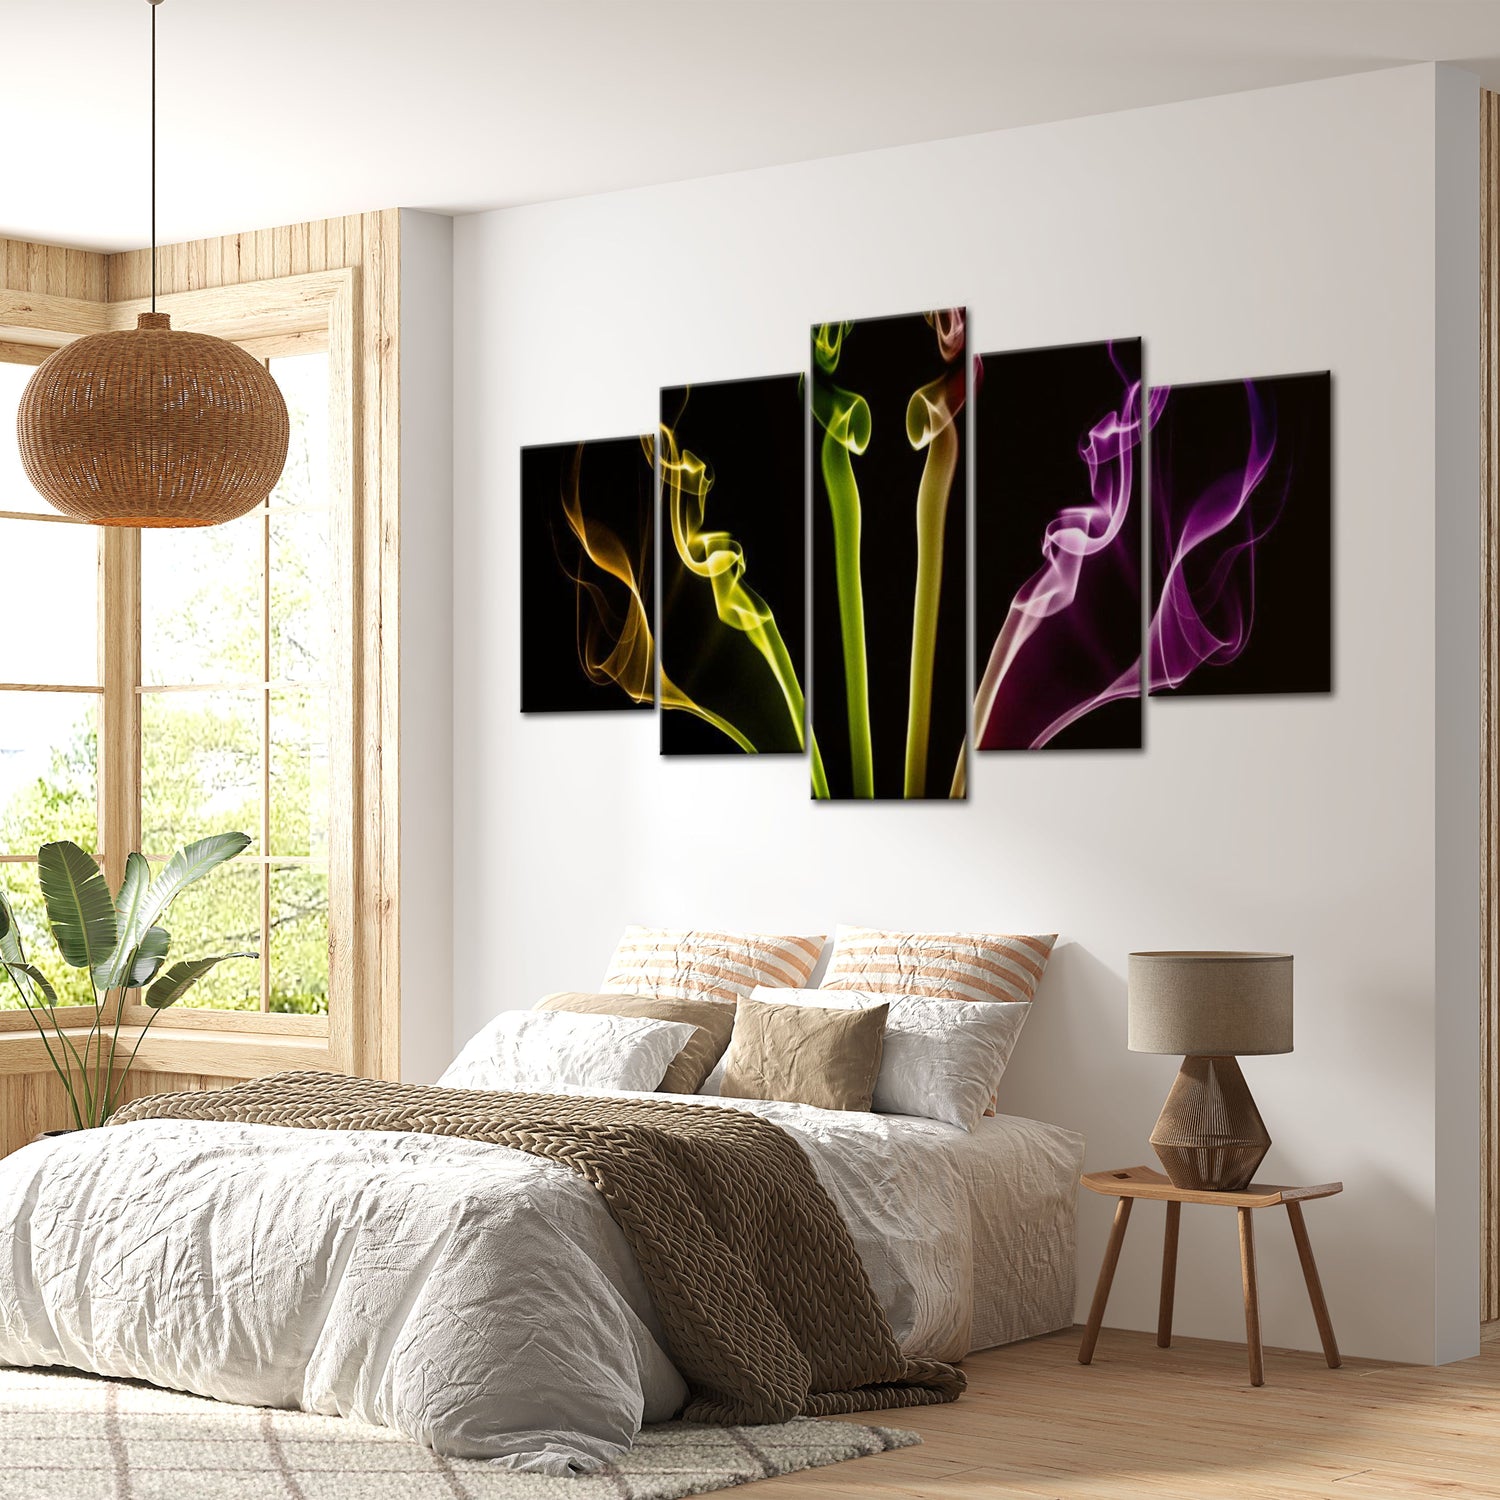 Abstract Canvas Wall Art - Multicolored Streaks - 5 Pieces